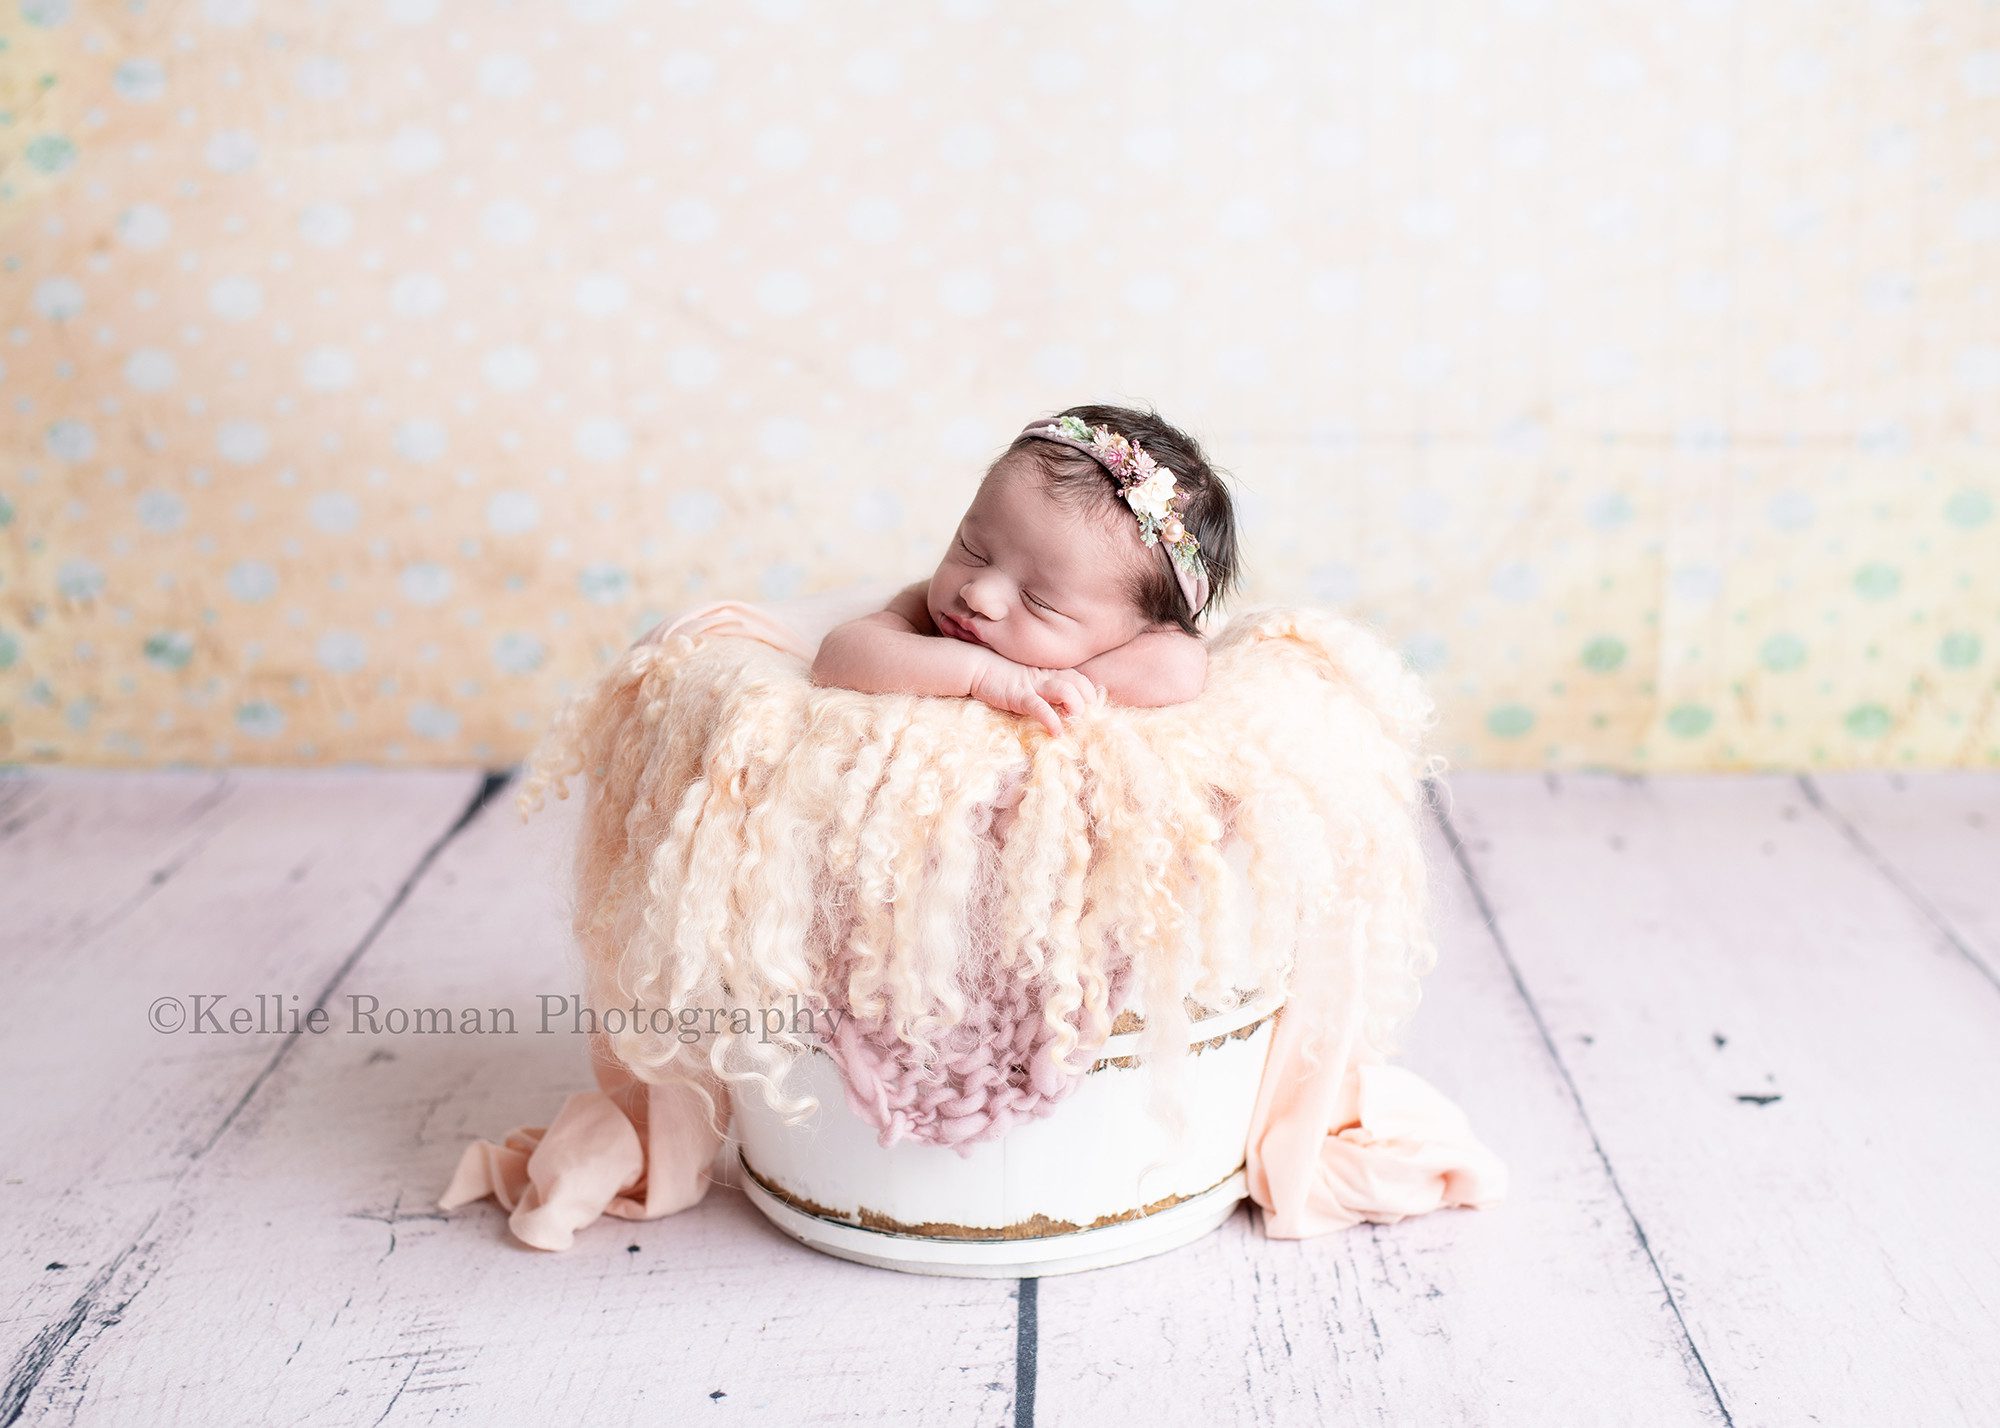 milwaukee newborn photographer. A infant baby girl is in a milwaukee photographer studio located in greendale. She's propped upright in a white bucket with peach and mauve fabric layers. The bucket is onto of a white rustic floor, and she's in front of a cream backdrop with teal polka dots.